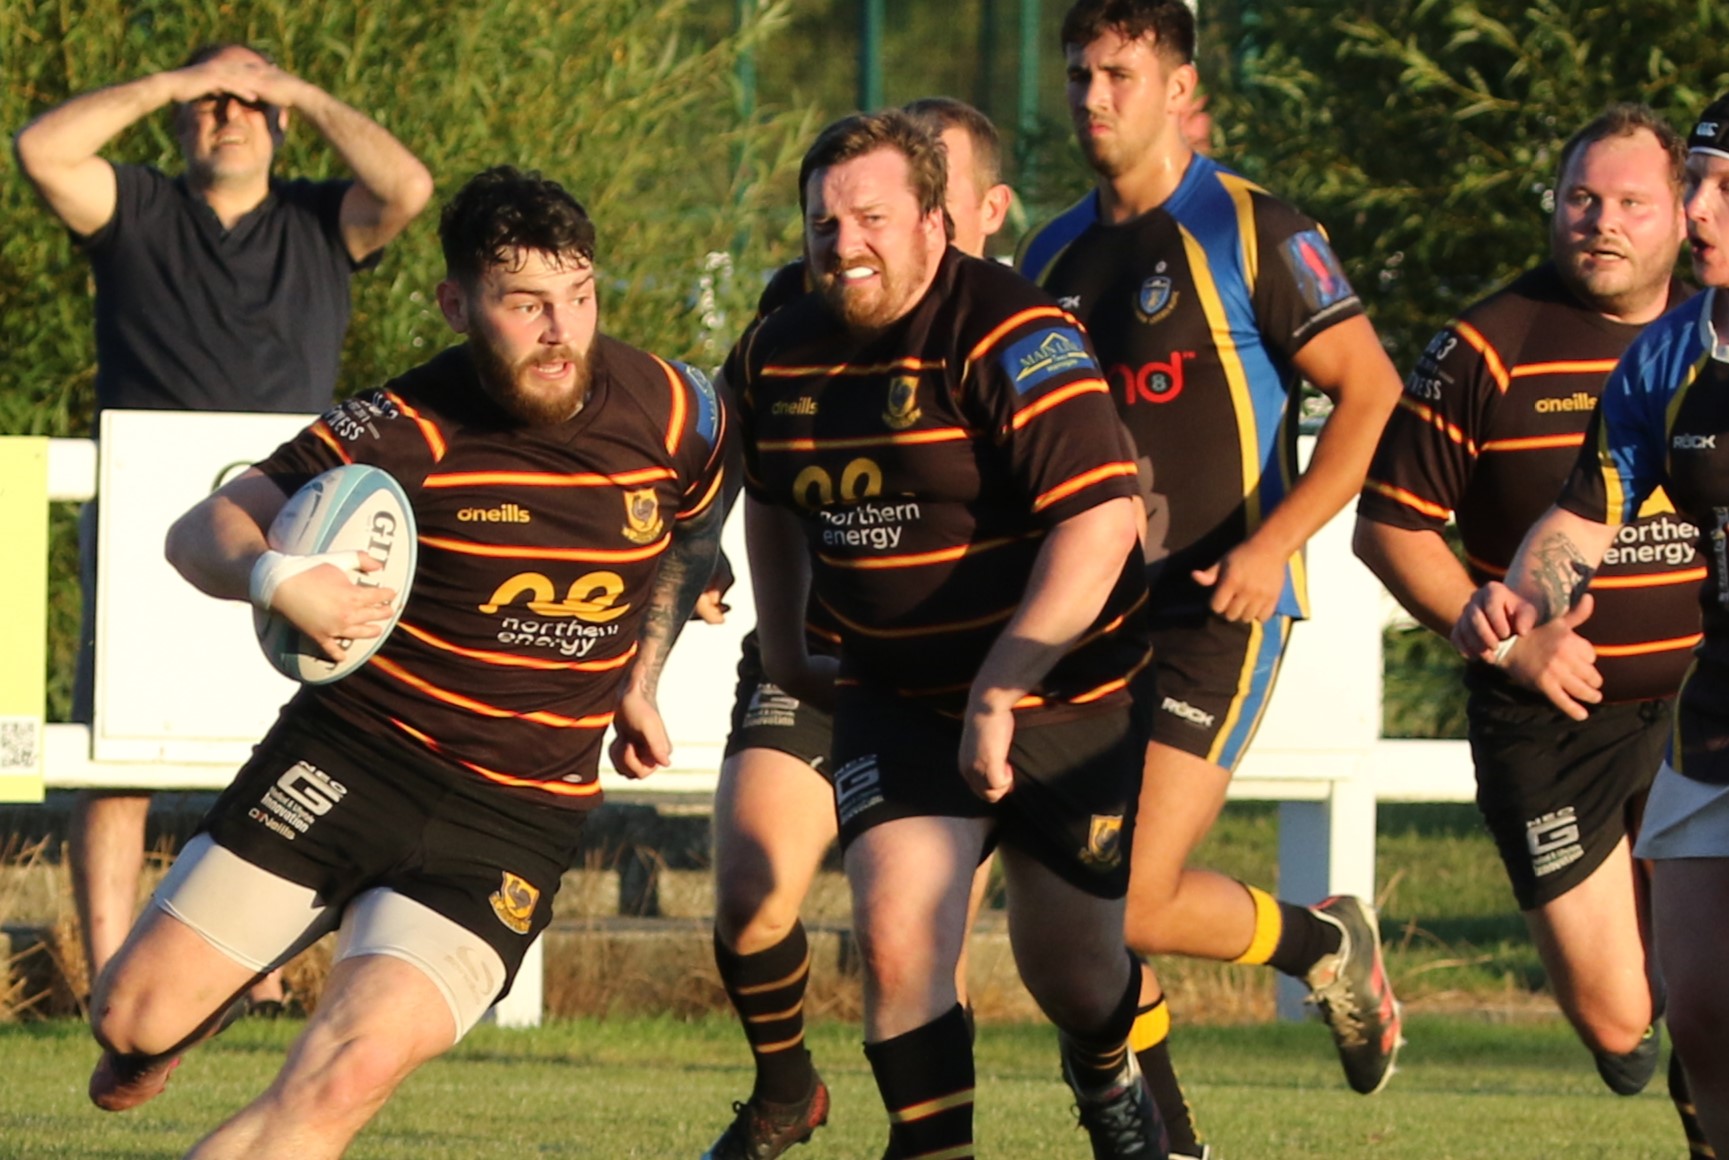 Second Pre-Season Win for Pythons